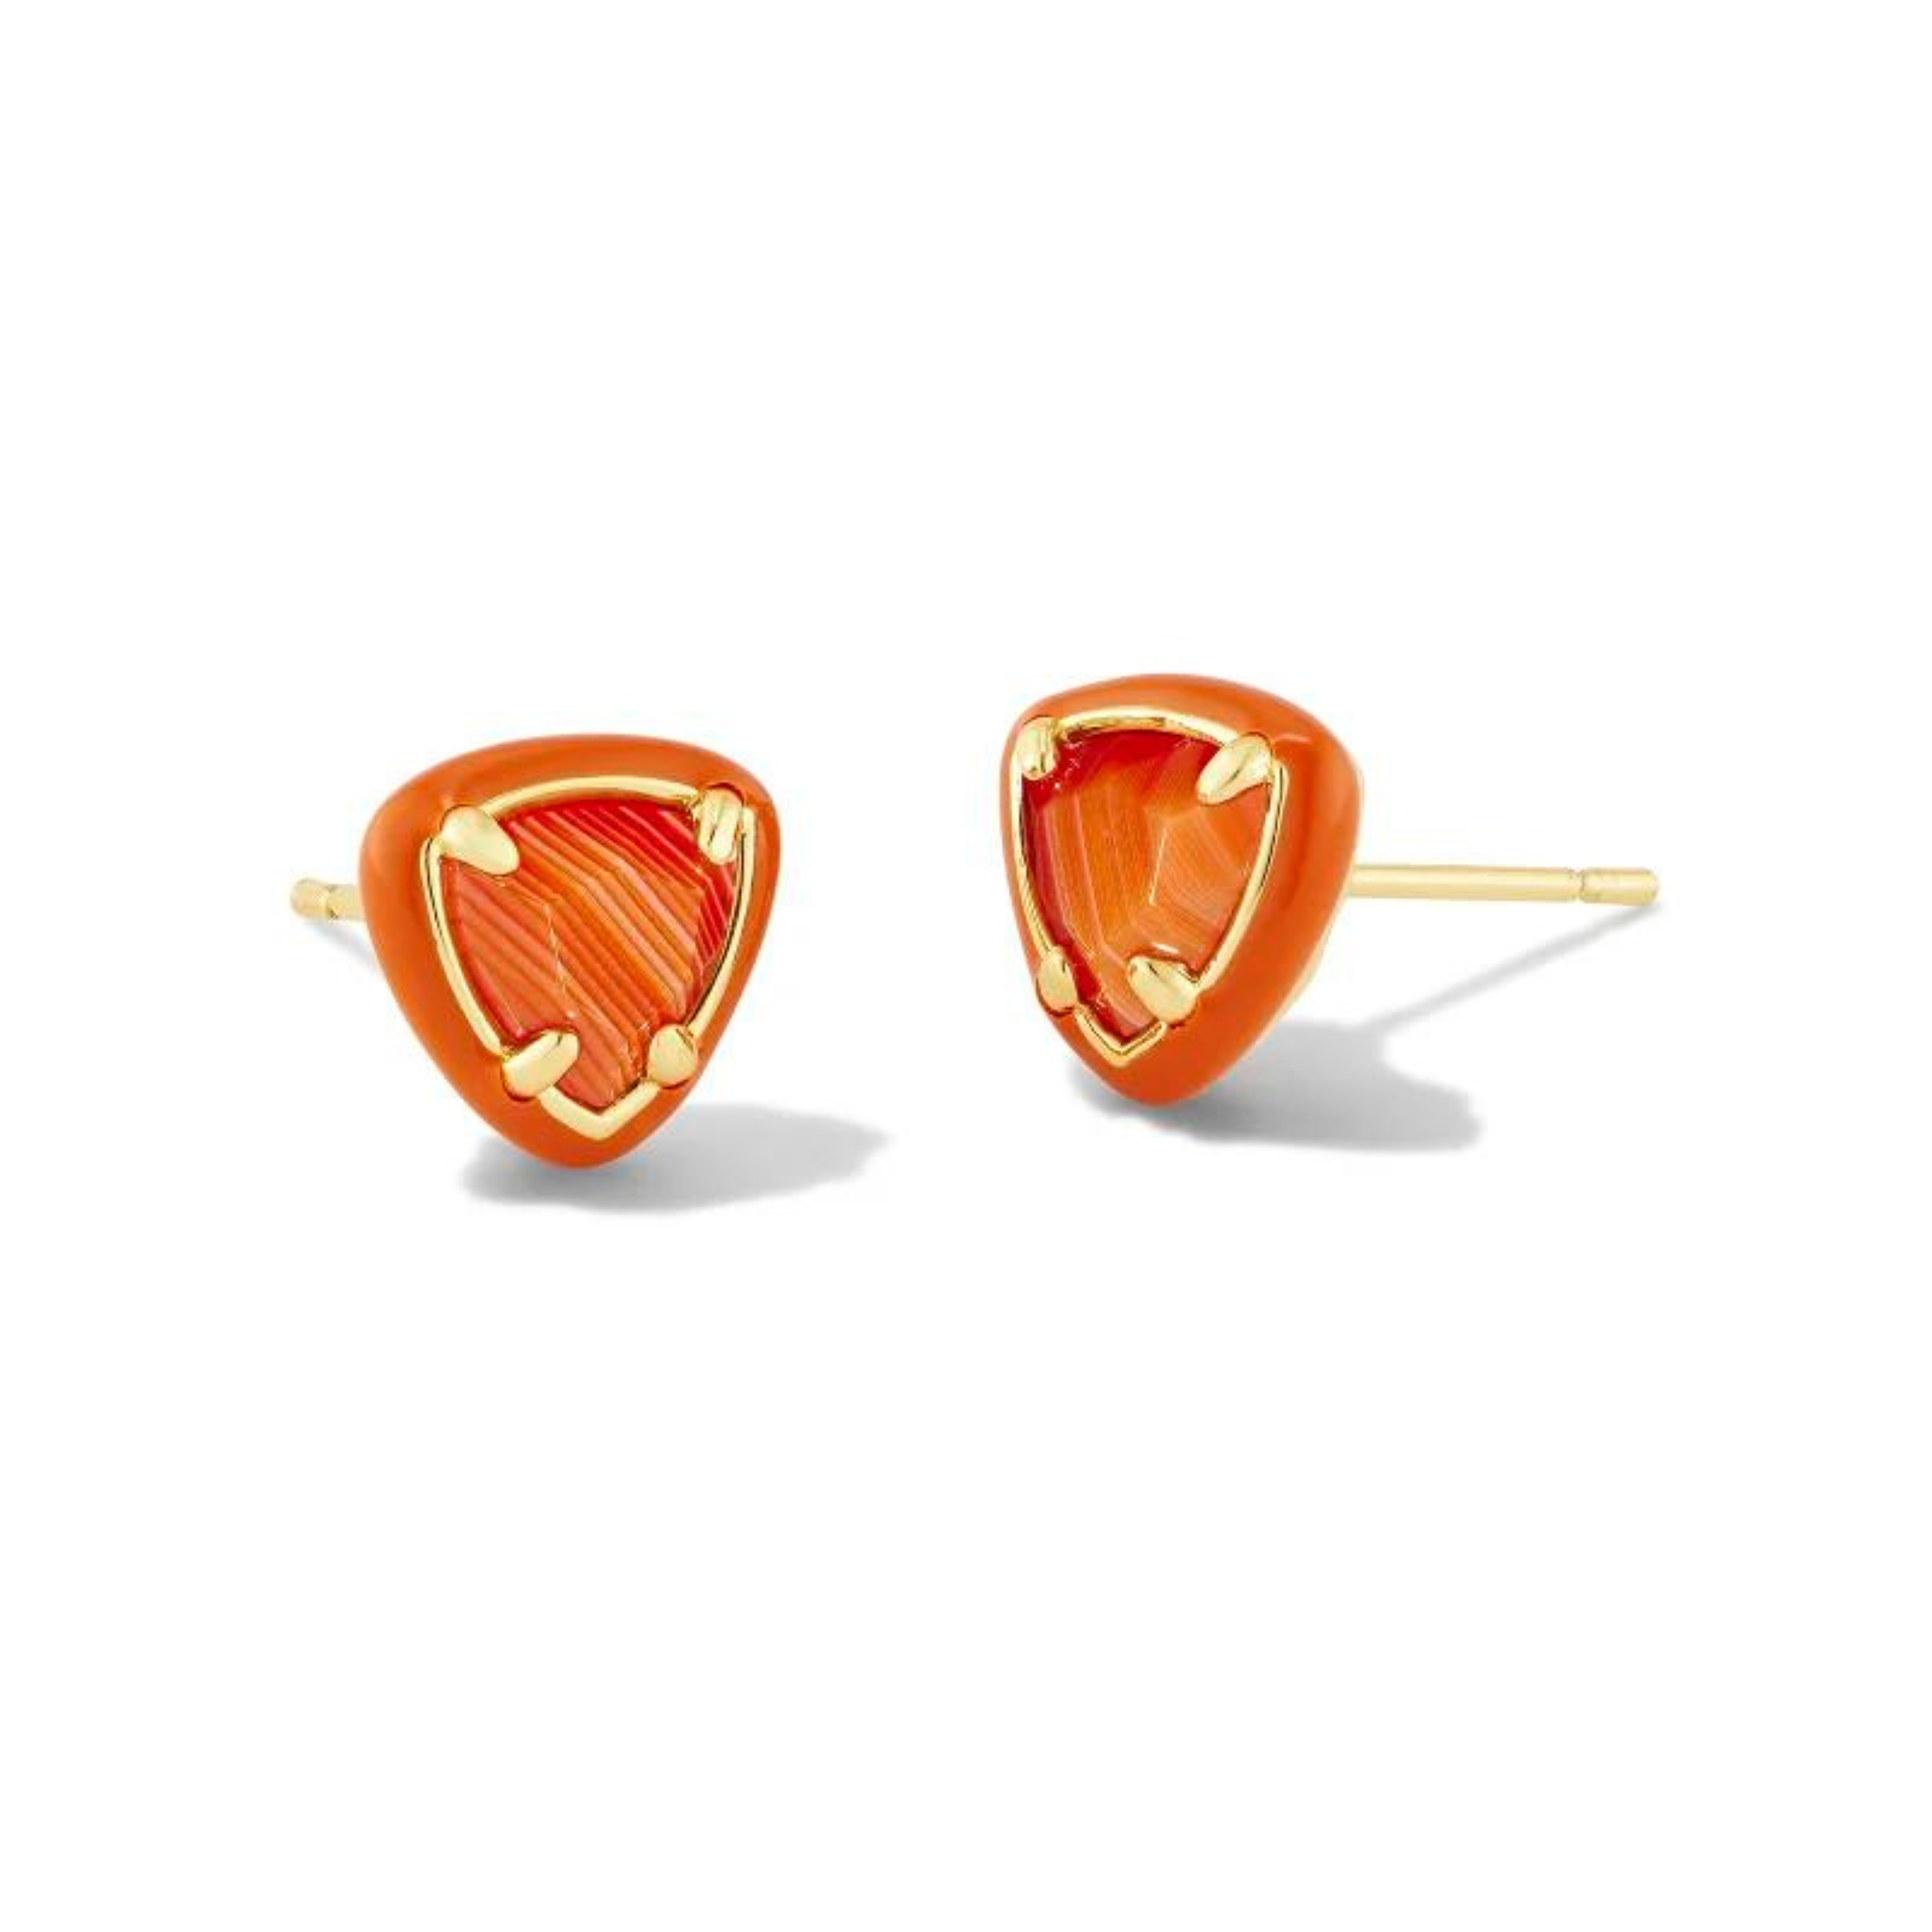 Orange framed, triangle shaped stud earrings with a center orange stone and a gold ear post. These earrings are pictured on a white background.